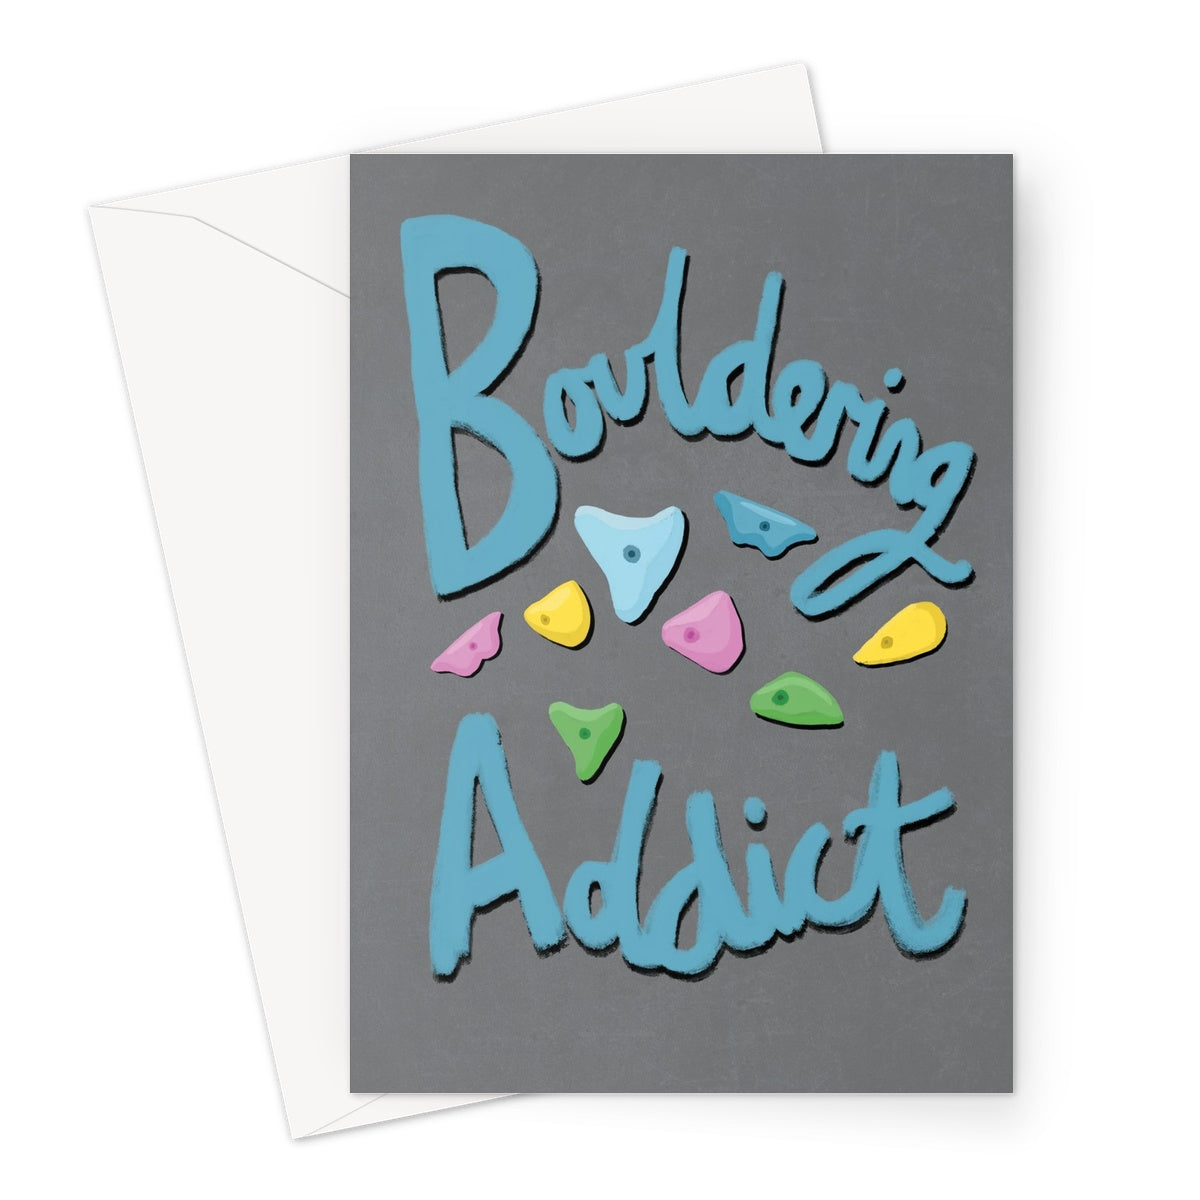 Bouldering Addict - Grey and Blue Greeting Card